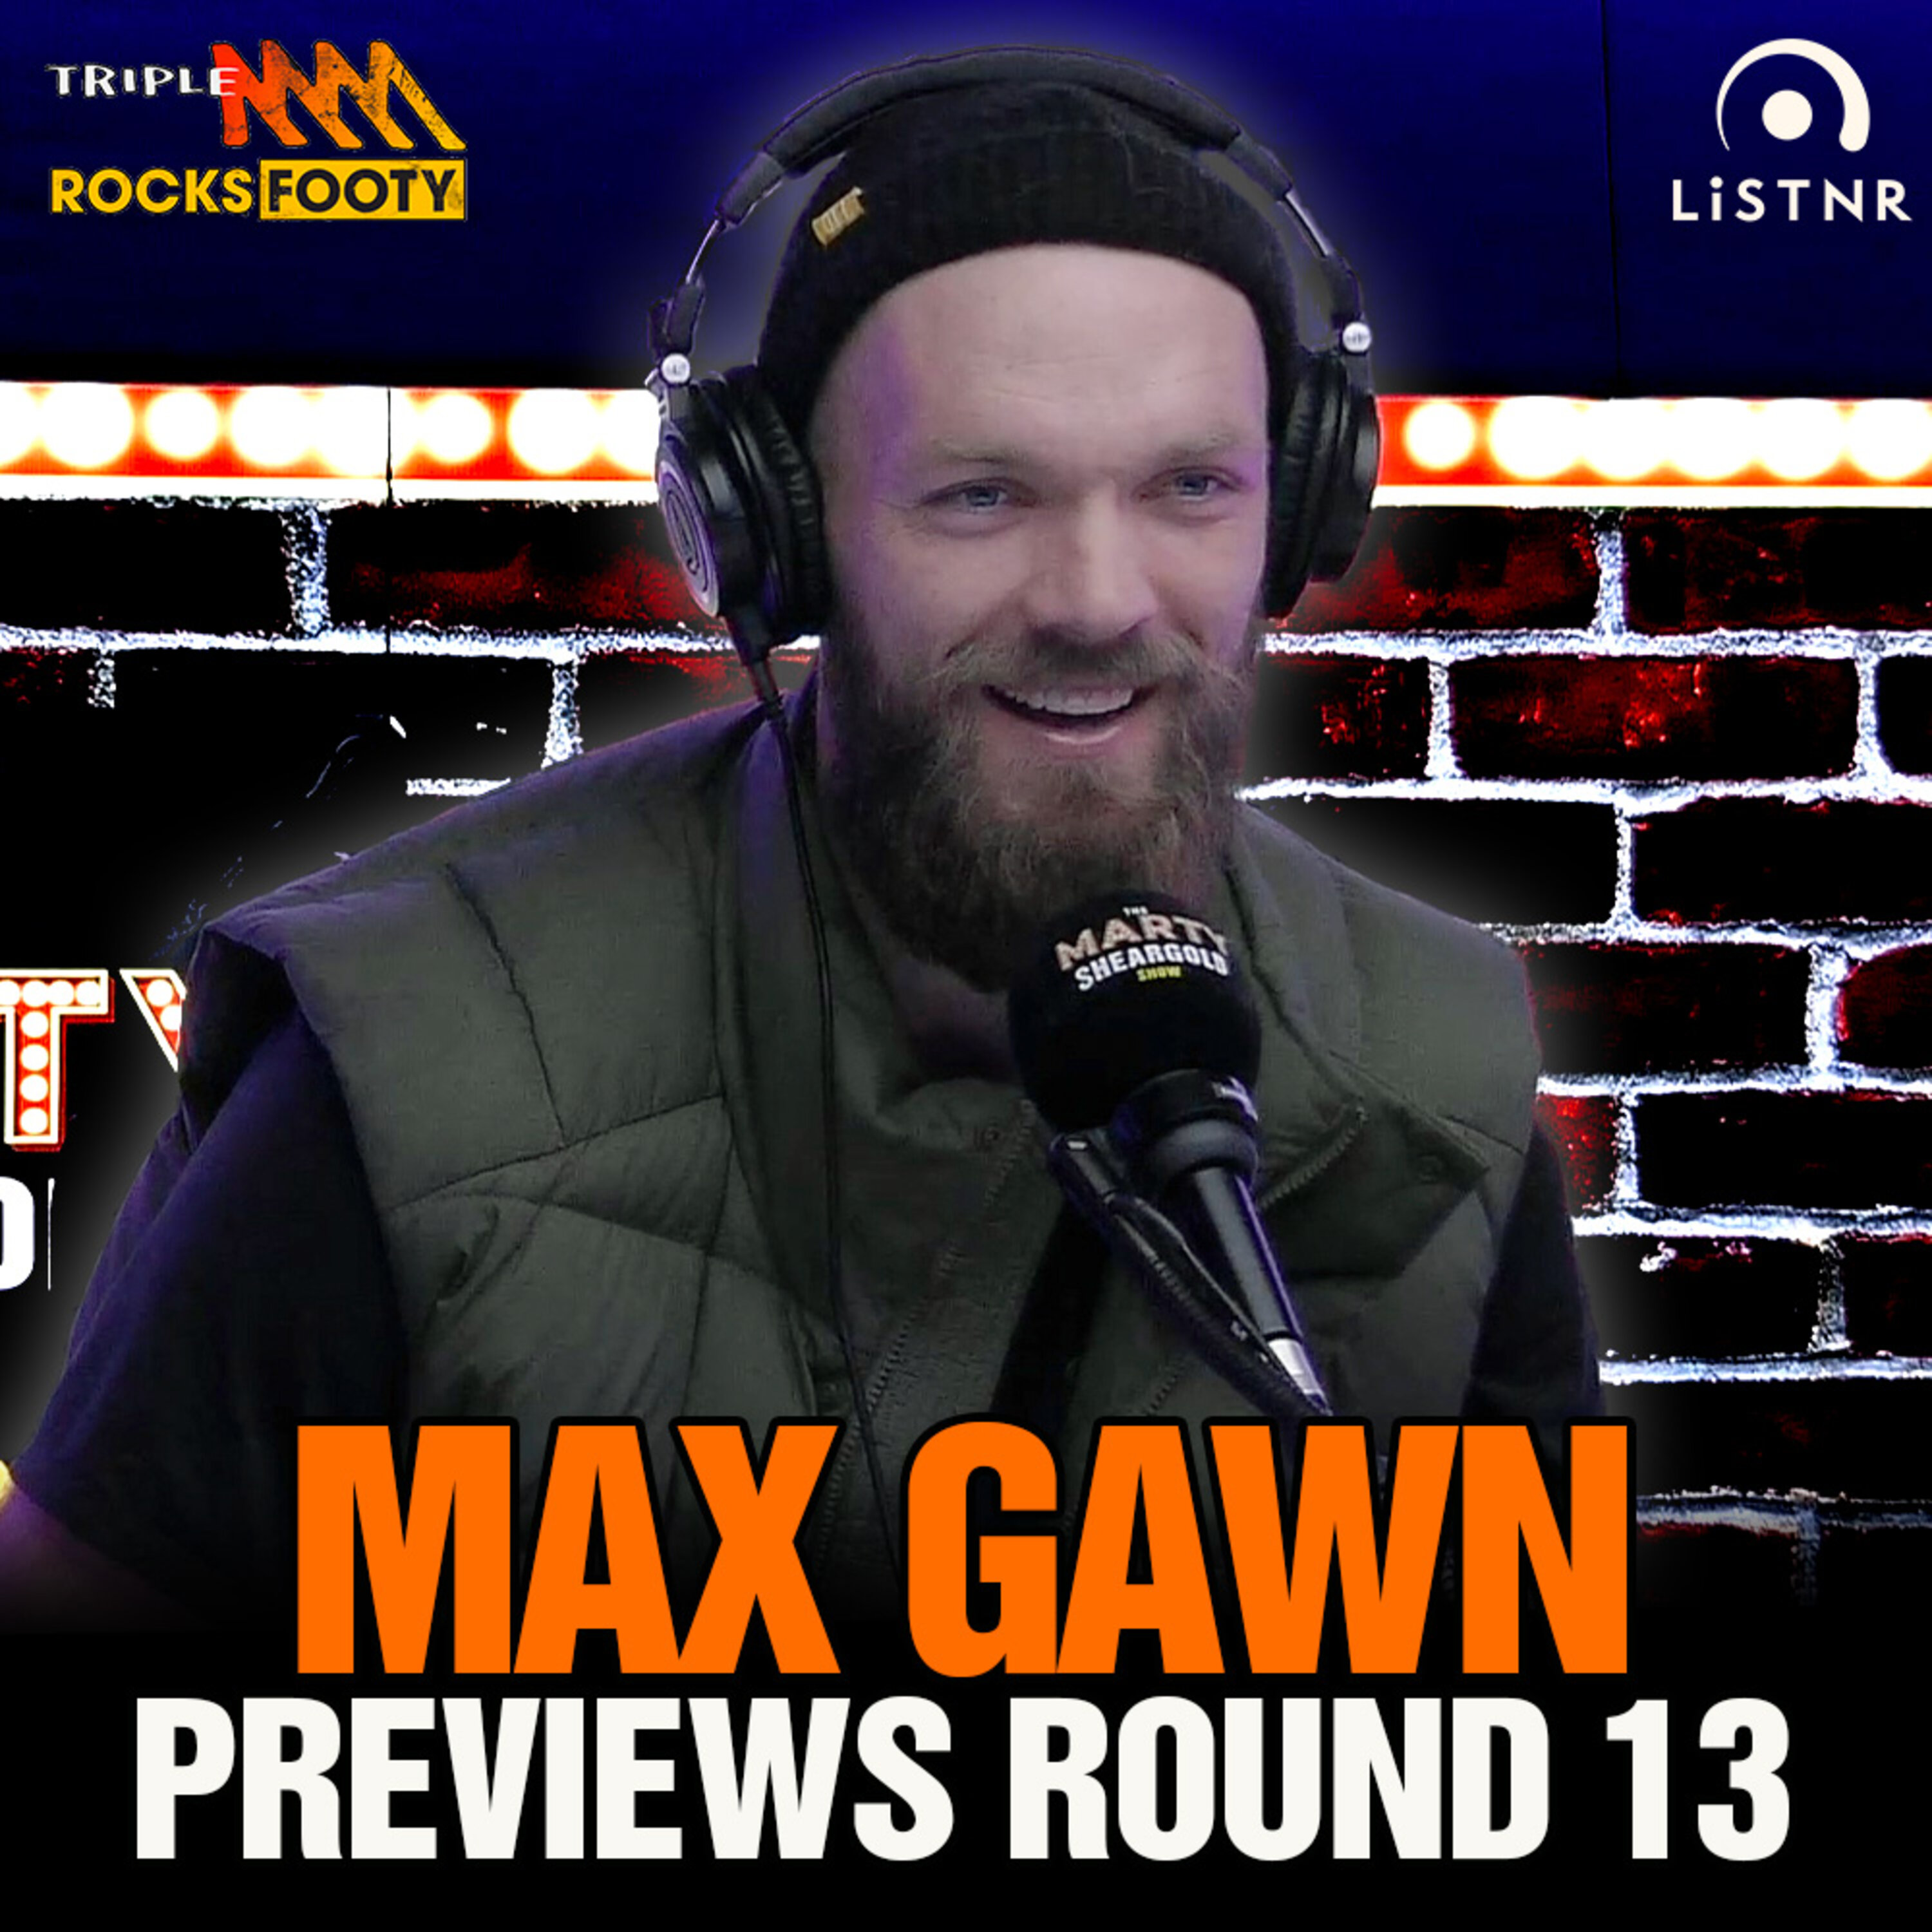 Max Gawn talks Neale Daniher’s legacy, Buddy Franklin’s milestone and more ahead of King’s Birthday!